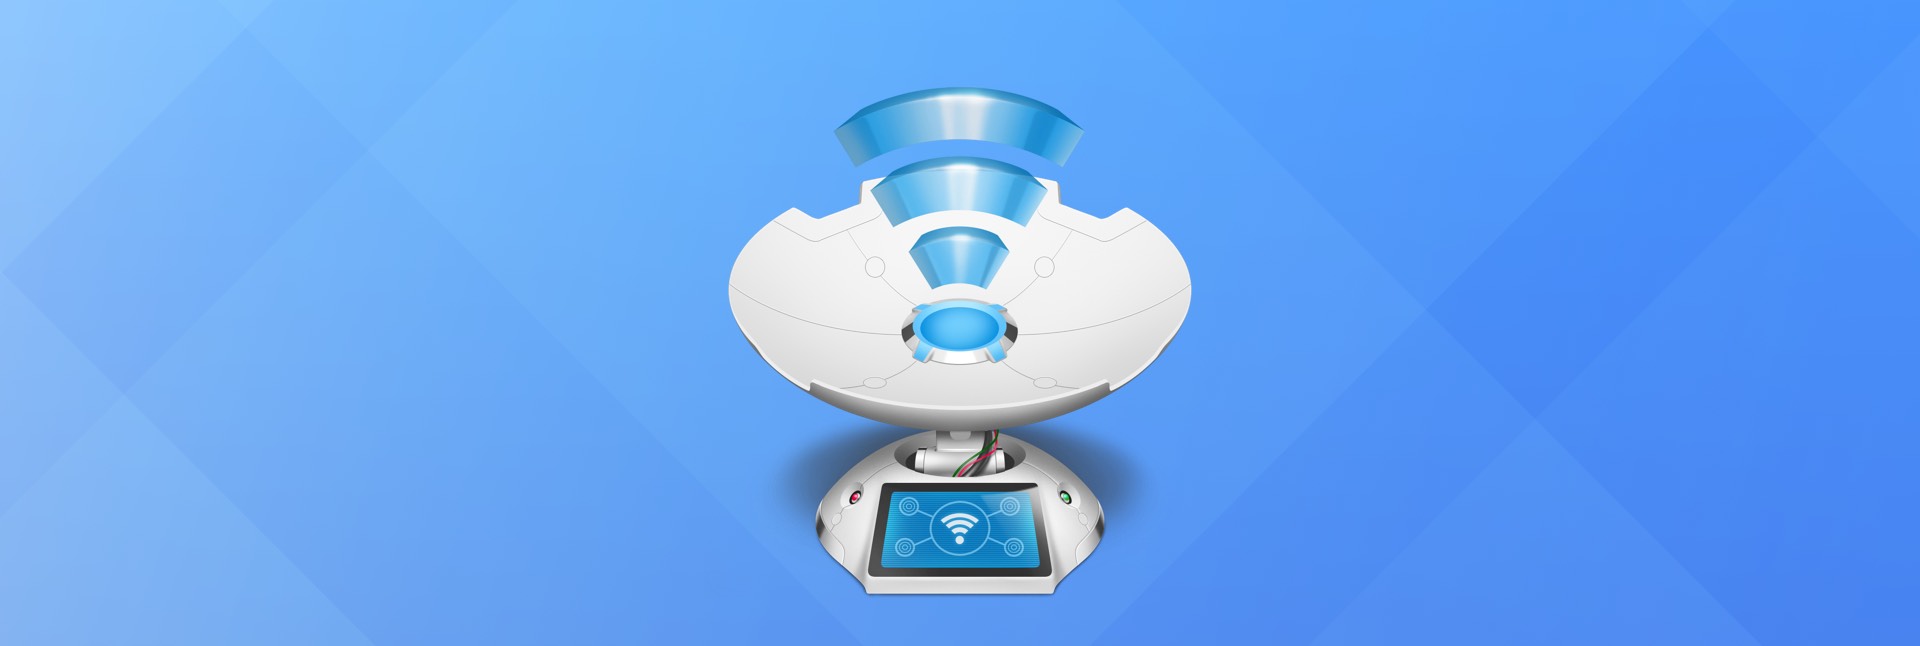 How To Plan Survey And Analyze Wi Fi Networks With NetSpot App